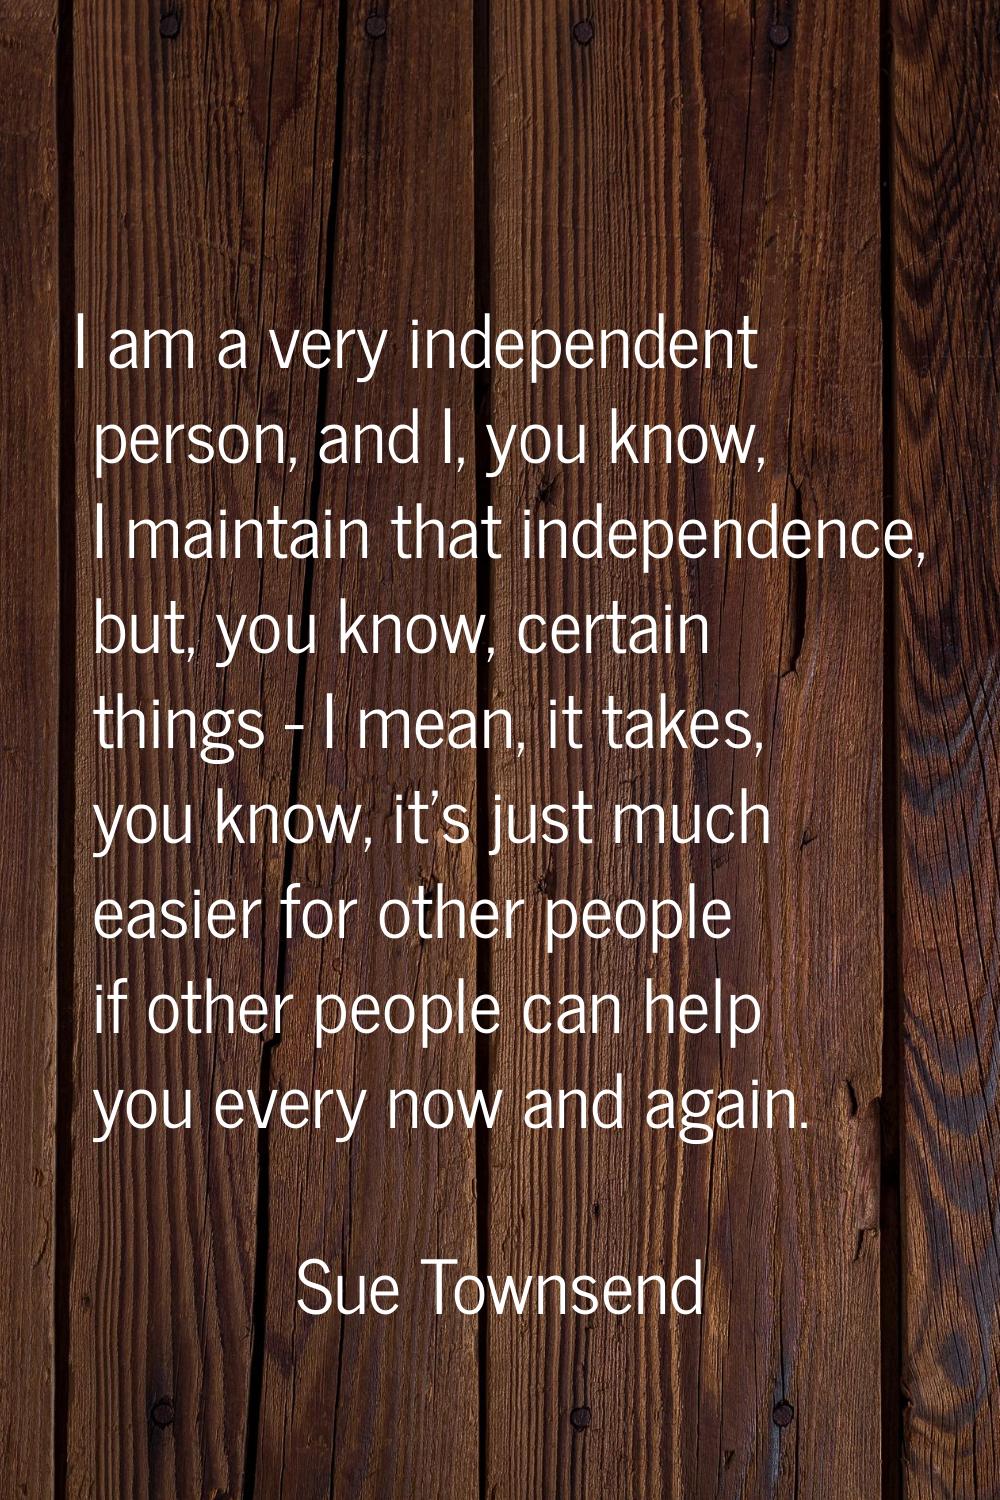 I am a very independent person, and I, you know, I maintain that independence, but, you know, certa